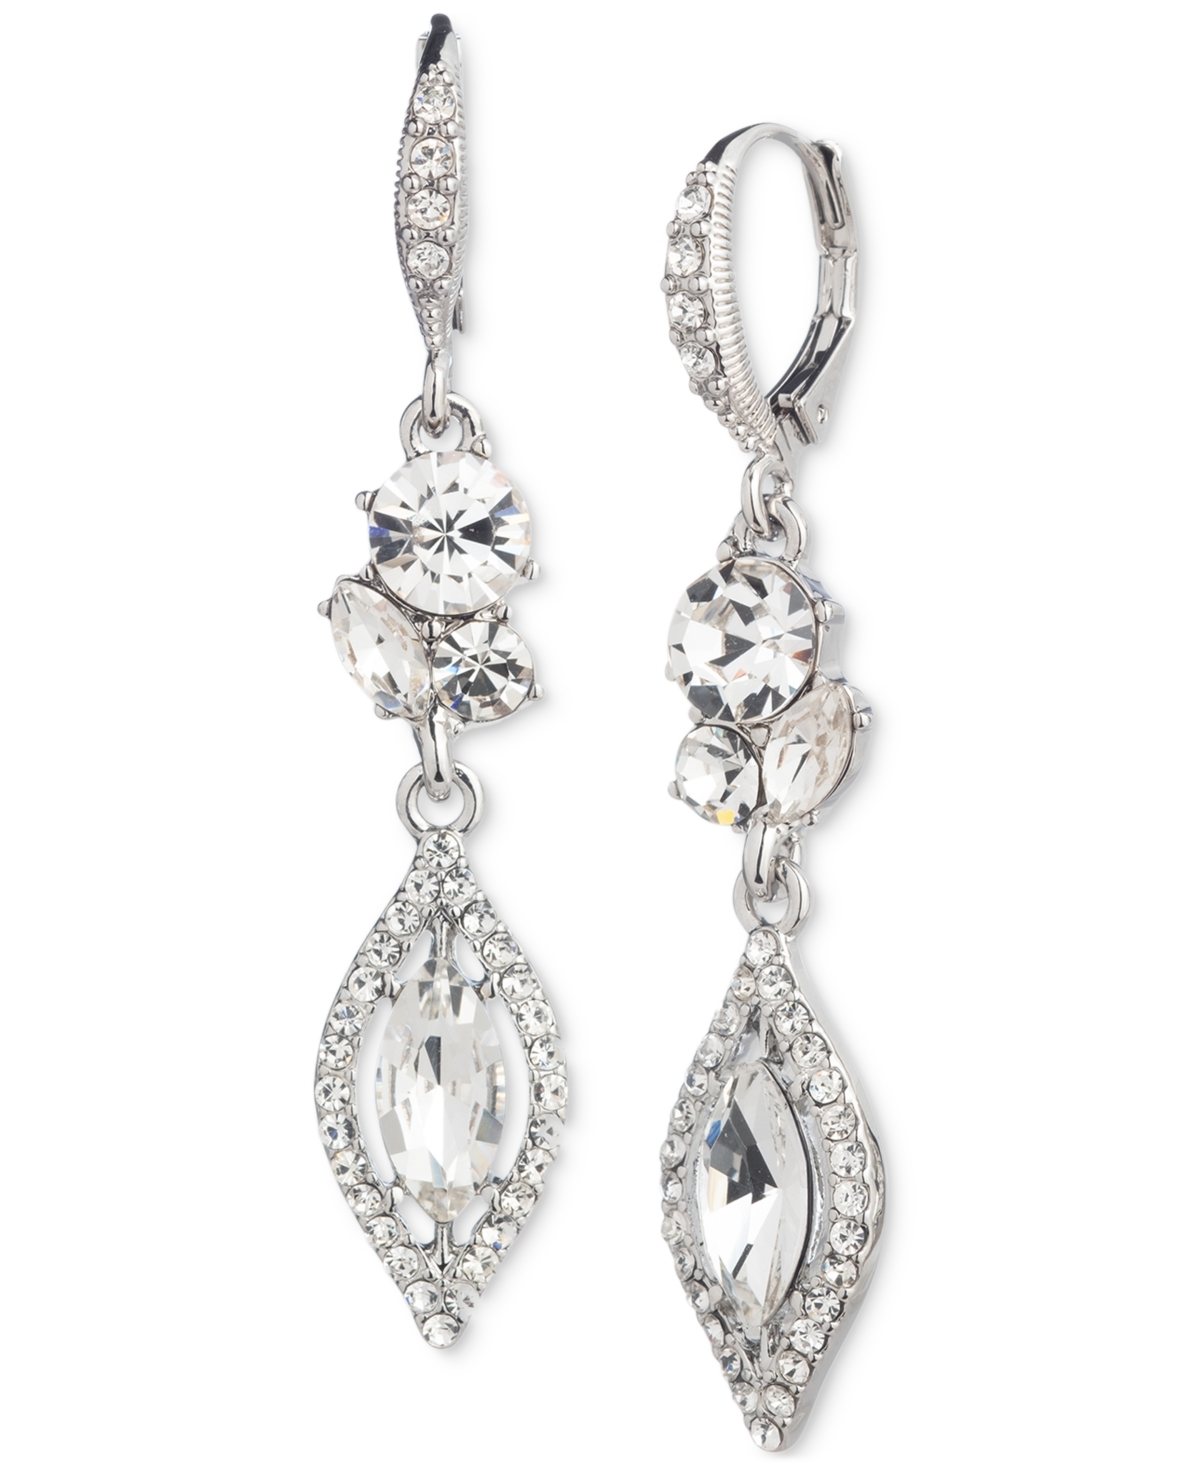 Gold-Tone Pave & Color Crystal Double Drop Earrings - White